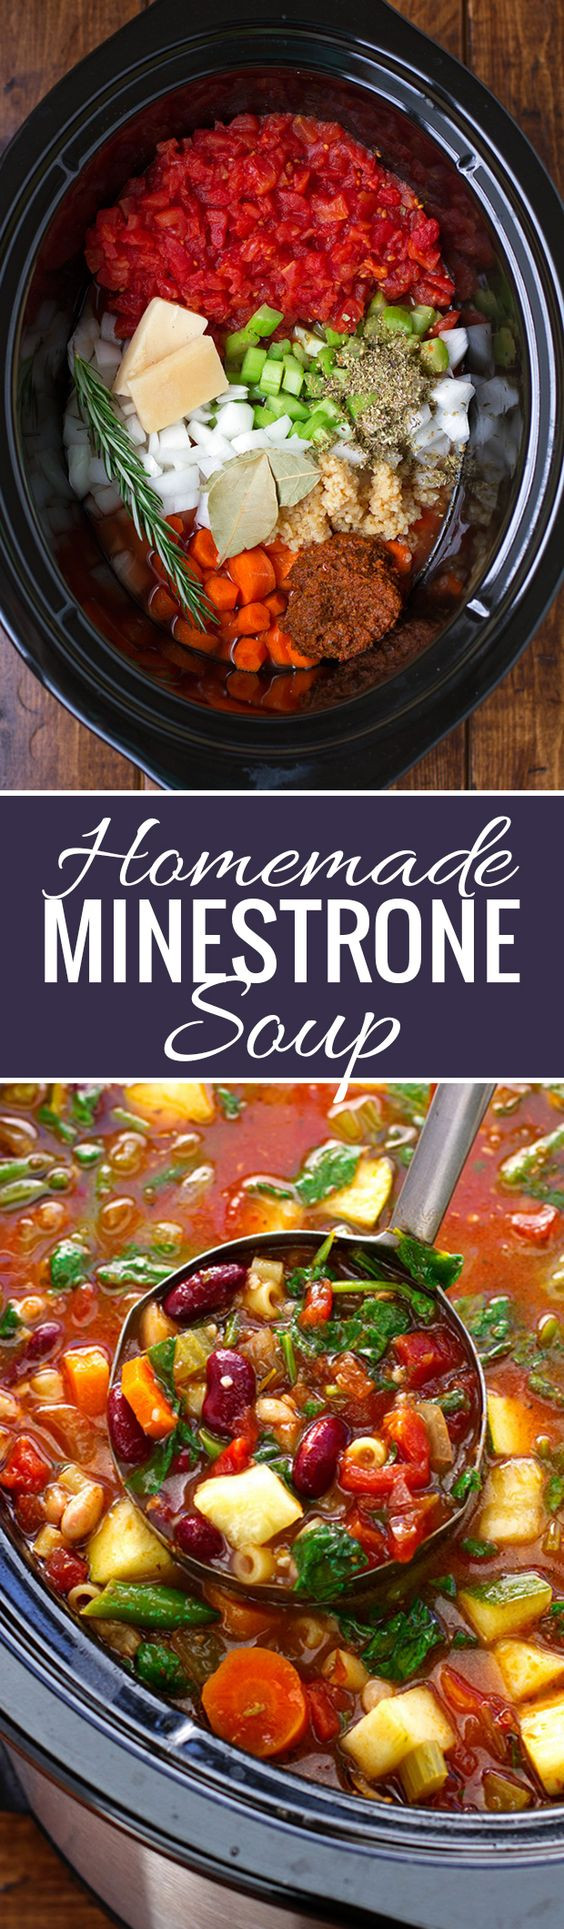 Soup Ideas For Dinner
 The BEST Homemade Soups Recipes – Easy Quick and Yummy